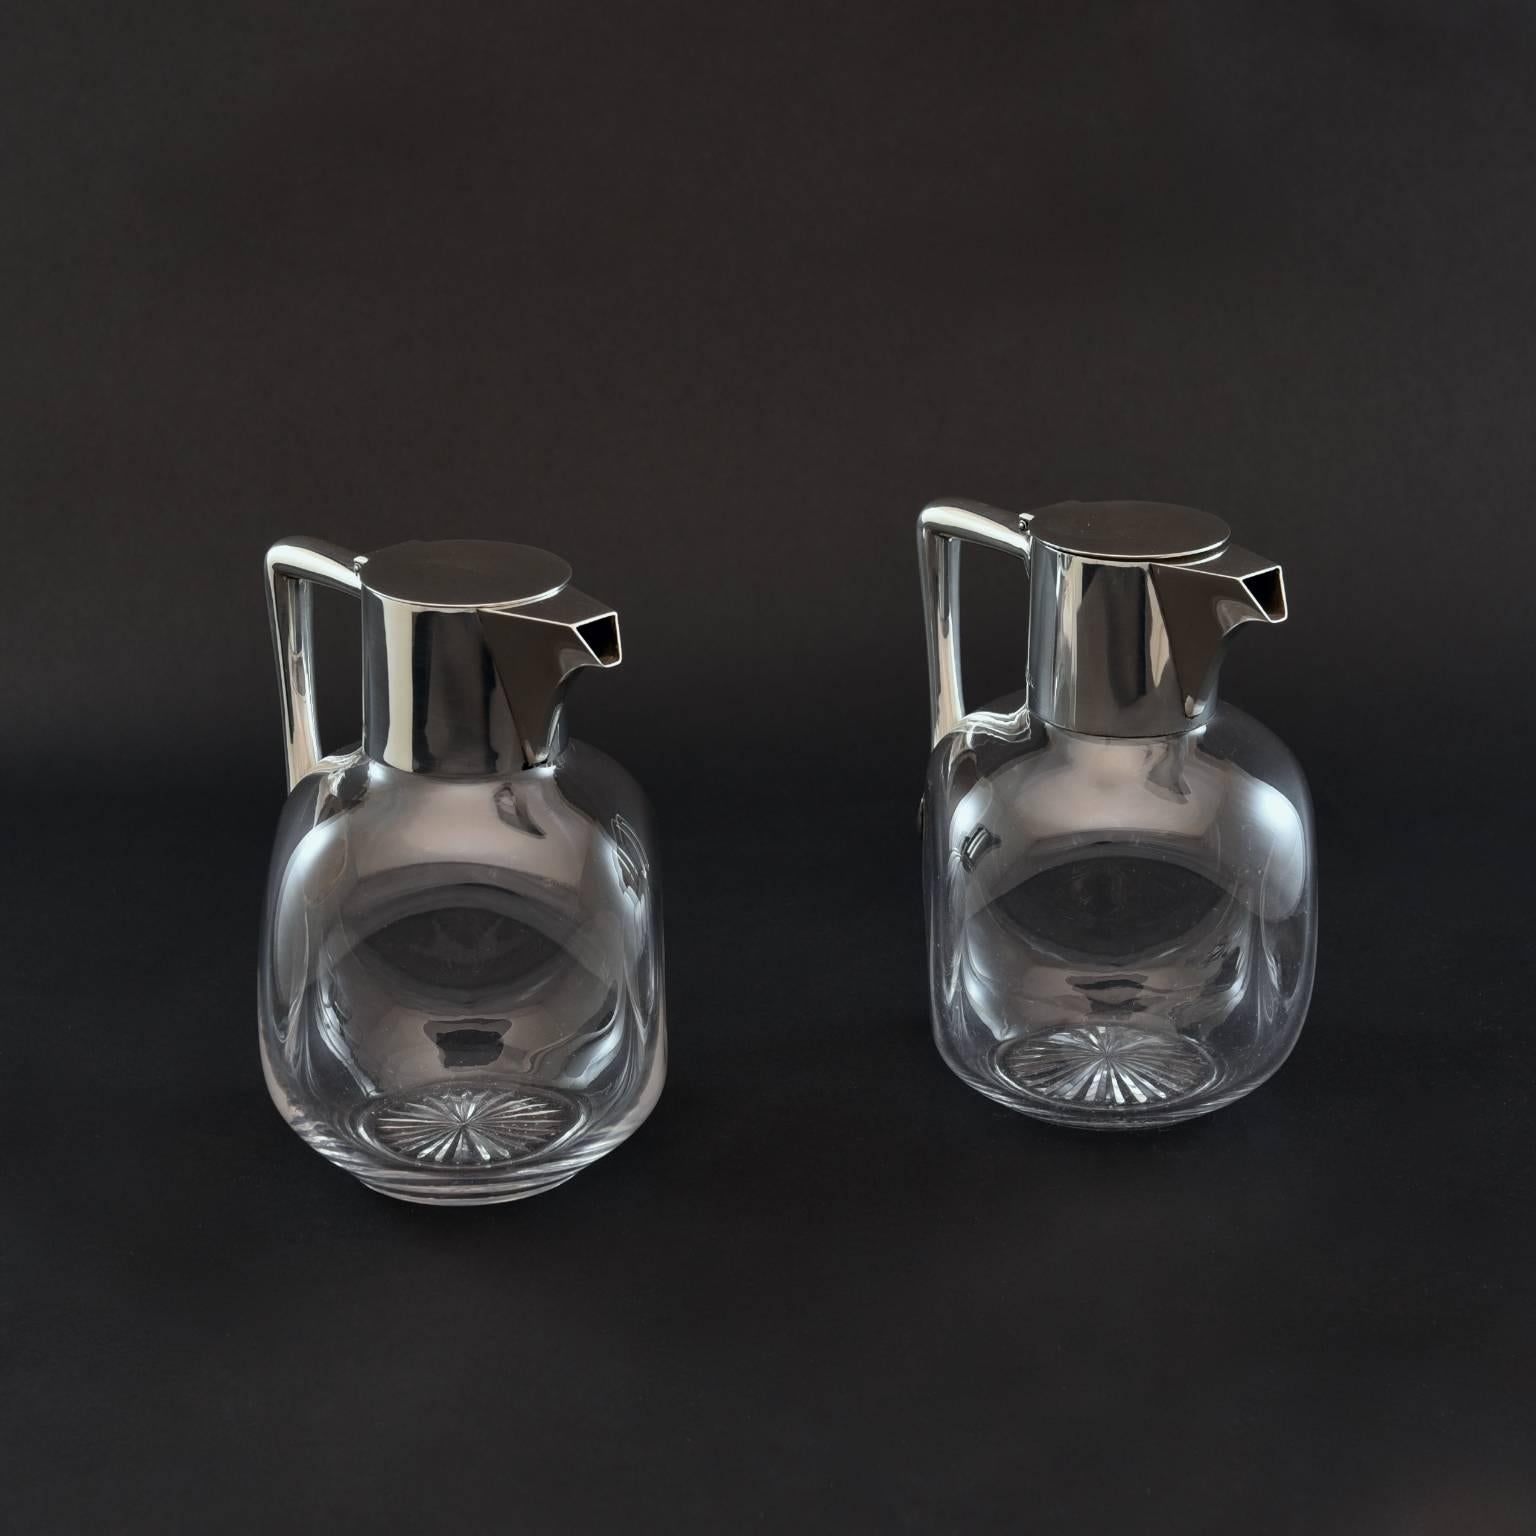 A stylish pair of late 19th century claret jugs by Hukin and Heath. With a handblown spherical glass body that incorporates a dimpled design and a star cut to the base. Silver handle and top hallmarked London, 1896. Deceptive in that although modest